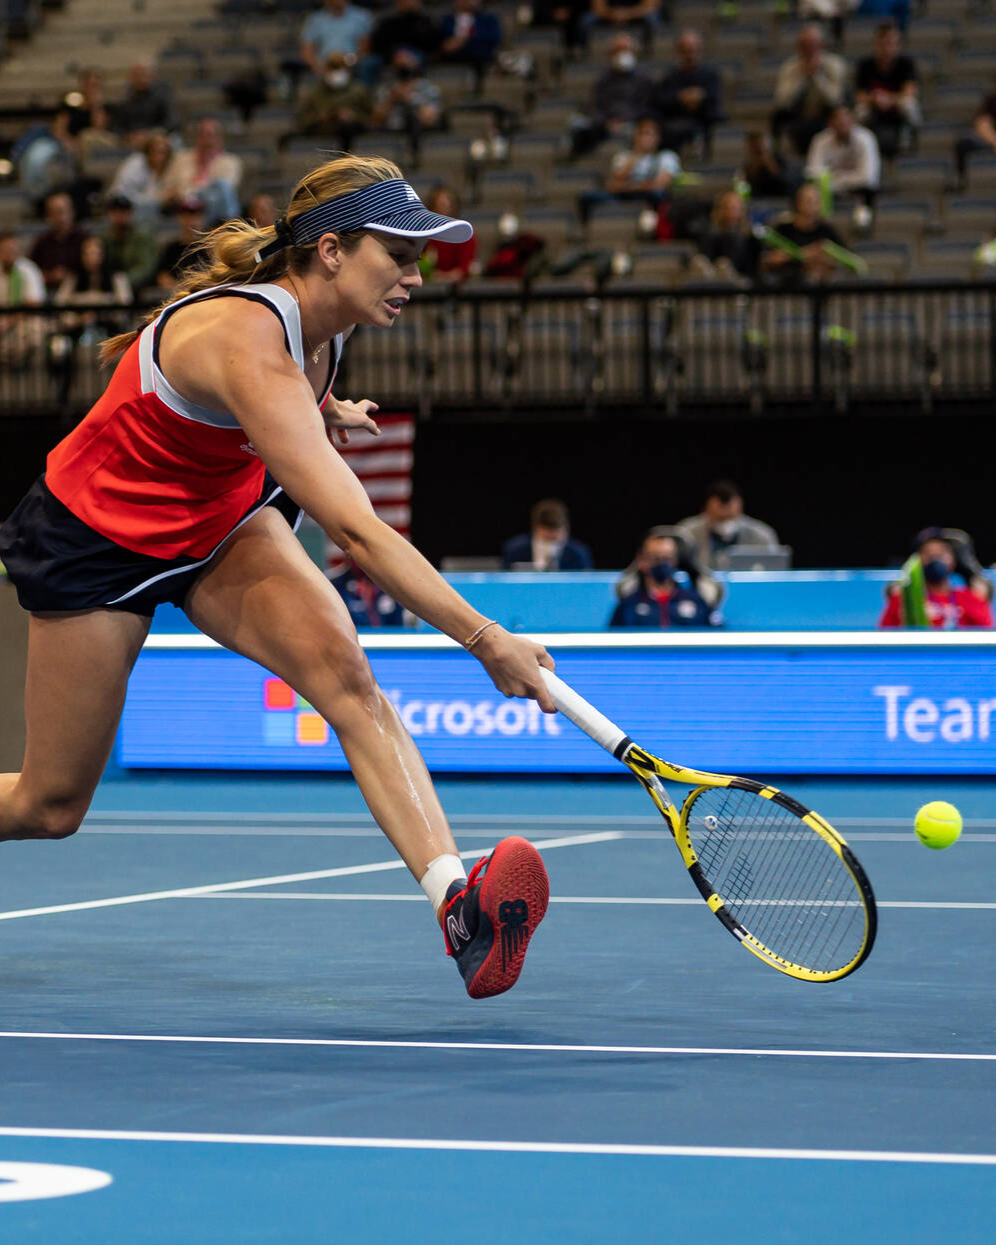 A female tennis player reaches mid-air to hit a tennis ball with her racket on the court. There are people sitting in a crowd on the stands behind her.